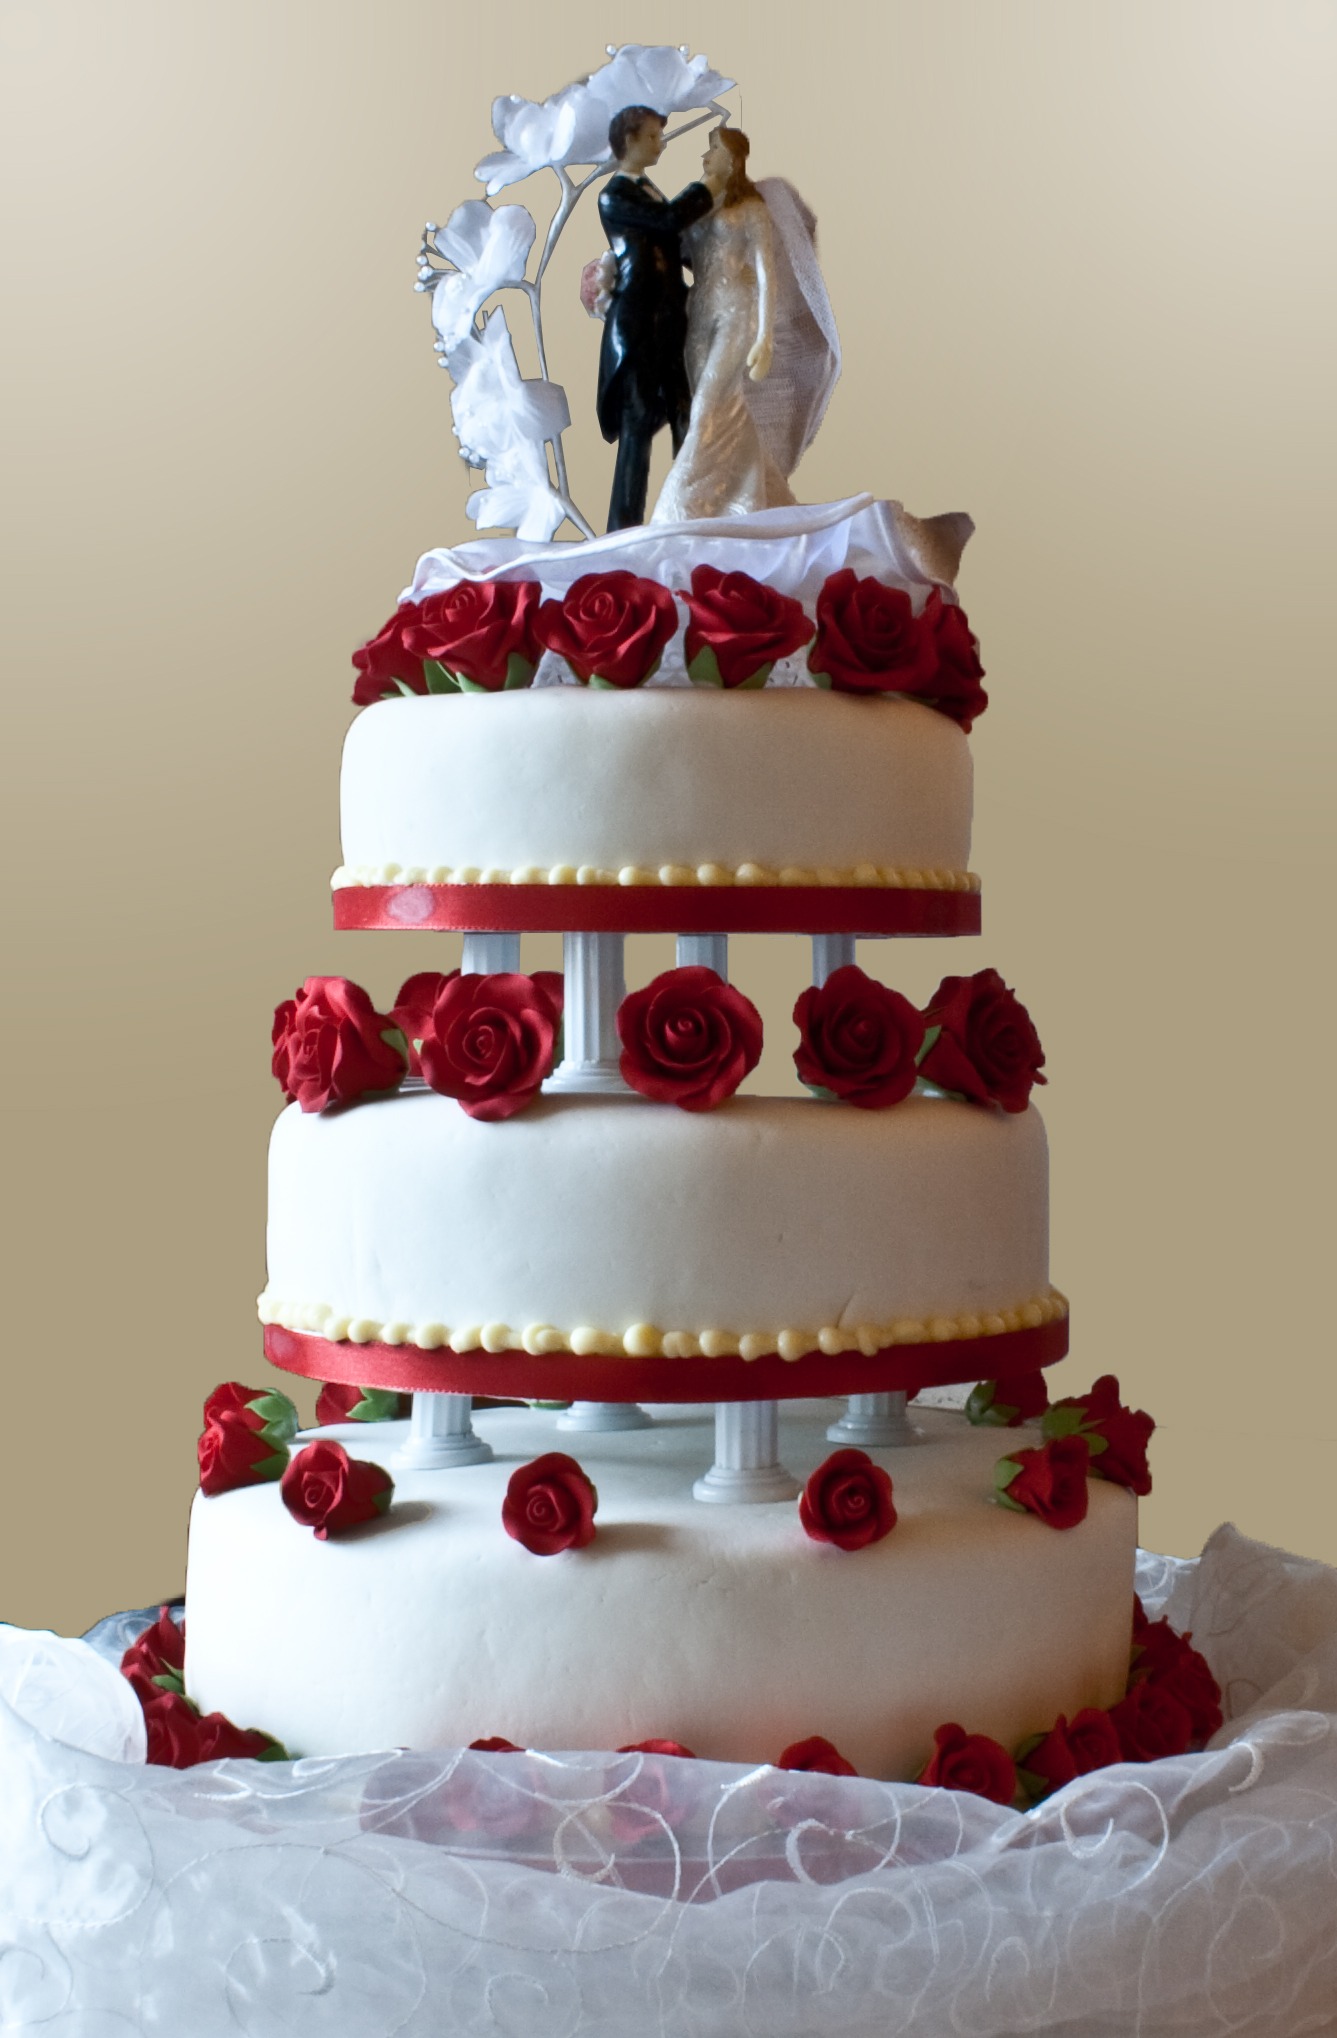 A three-layer wedding cake with pillar supports and “topper” figures